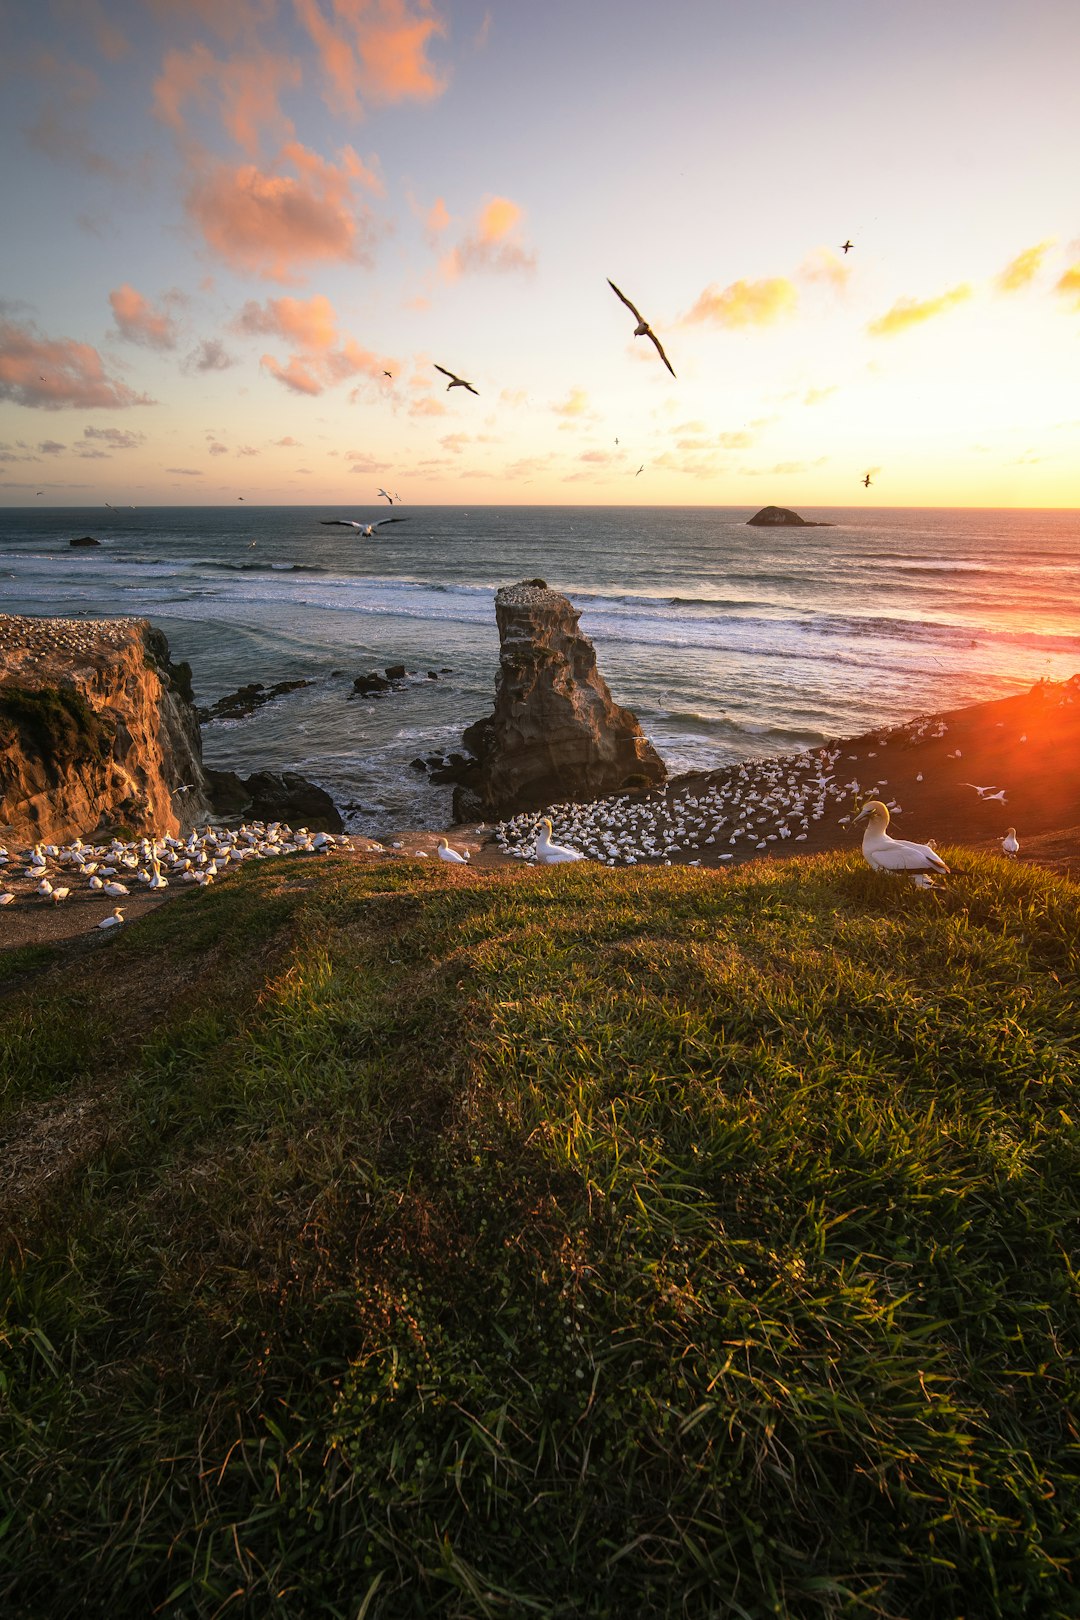 travelers stories about Shore in Muriwai Beach, New Zealand